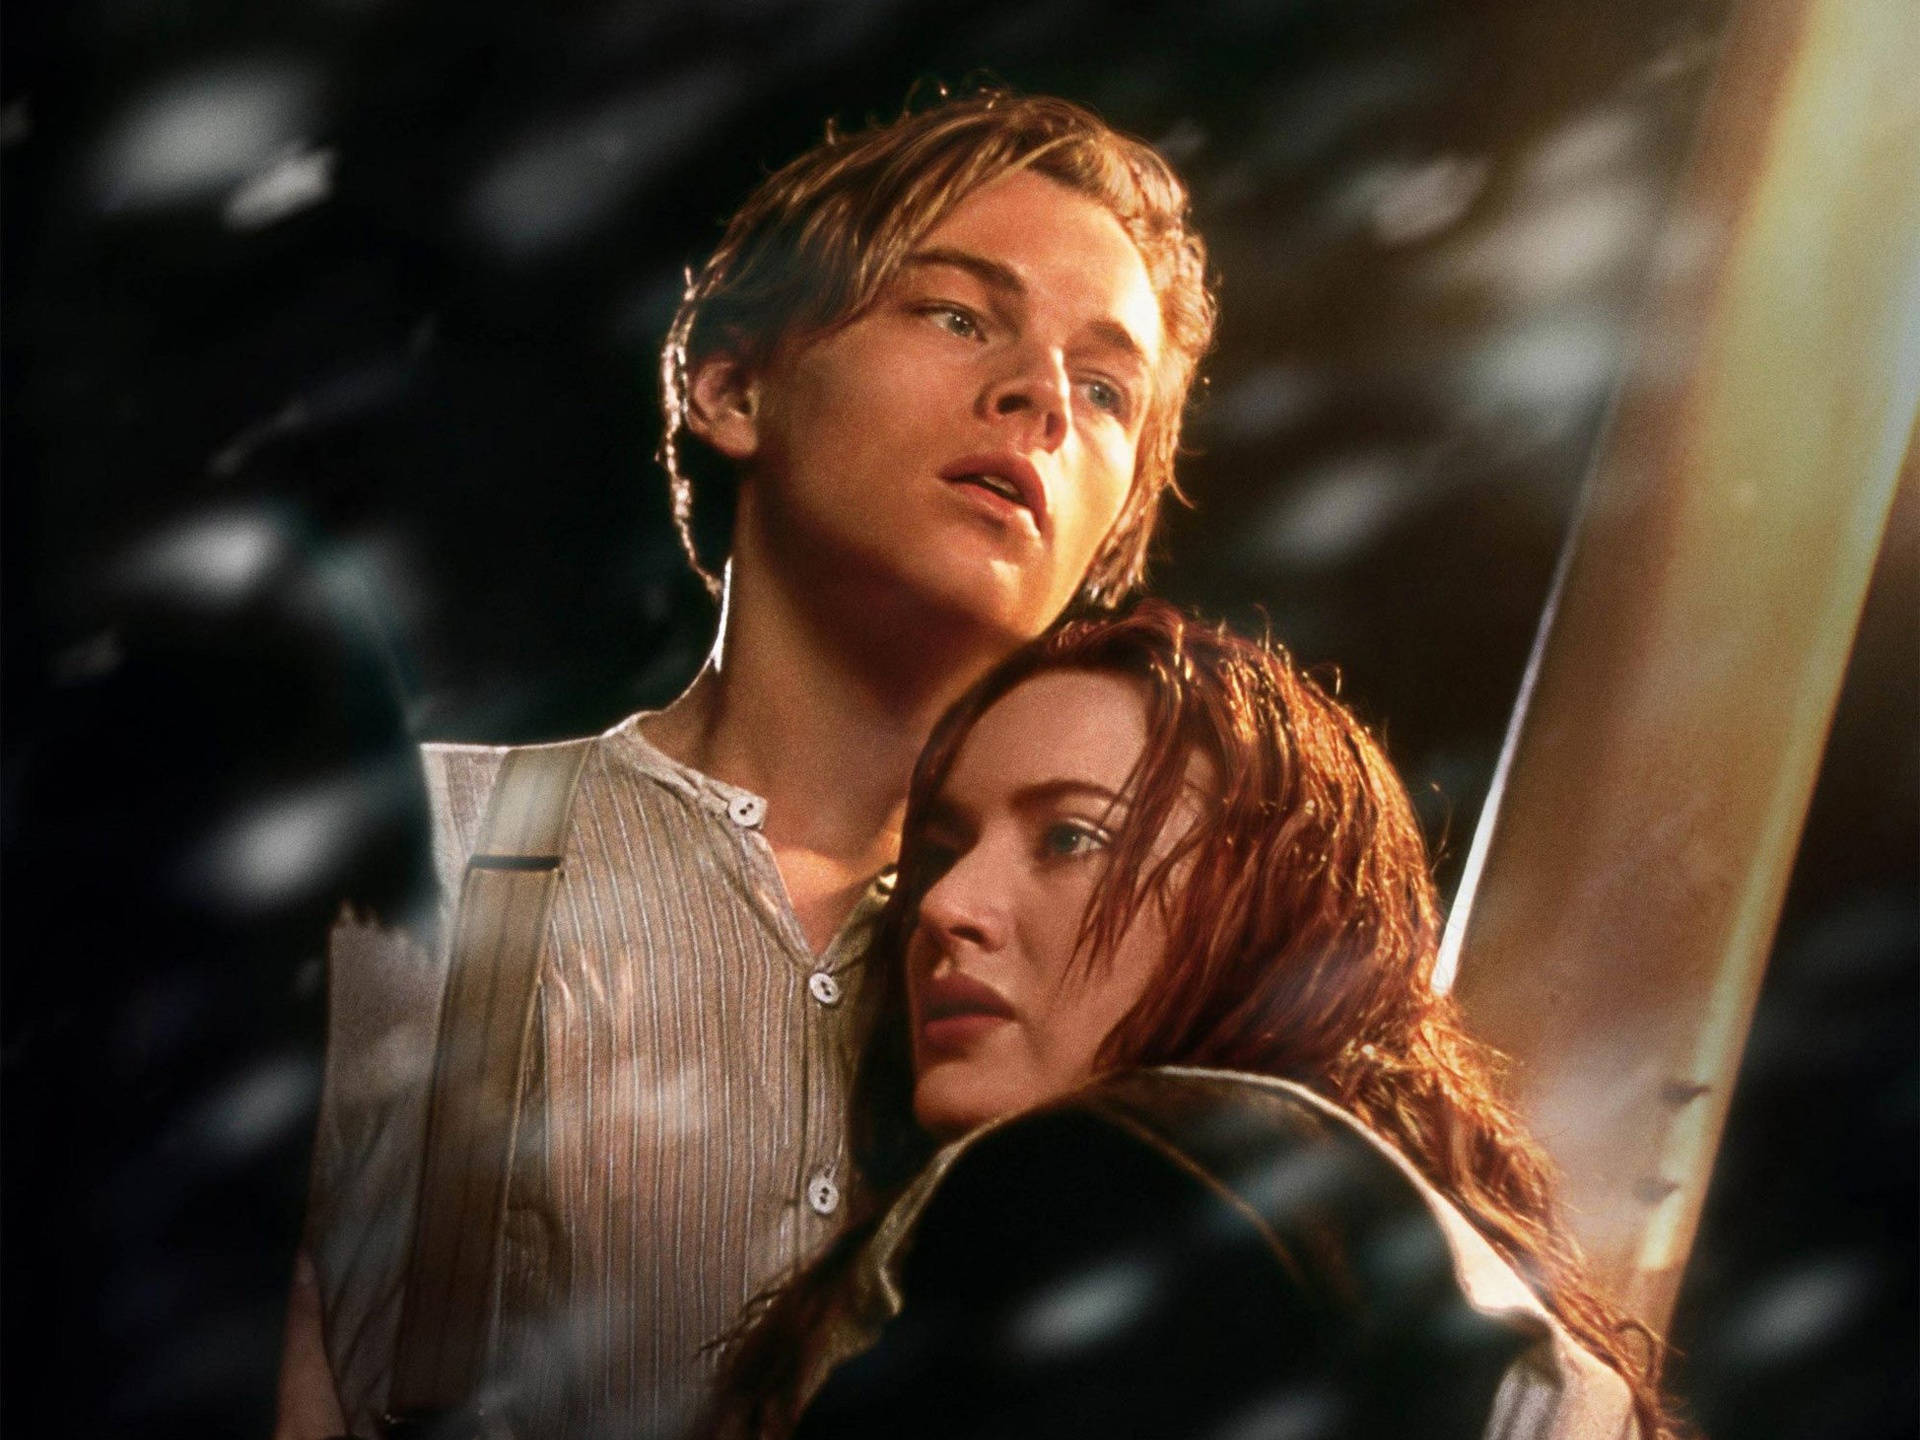 20 Titanic Movie Hd Wallpapers Revealed  Titanic Images Hd Wallpaper  Download  1024x768 Wallpaper  teahubio